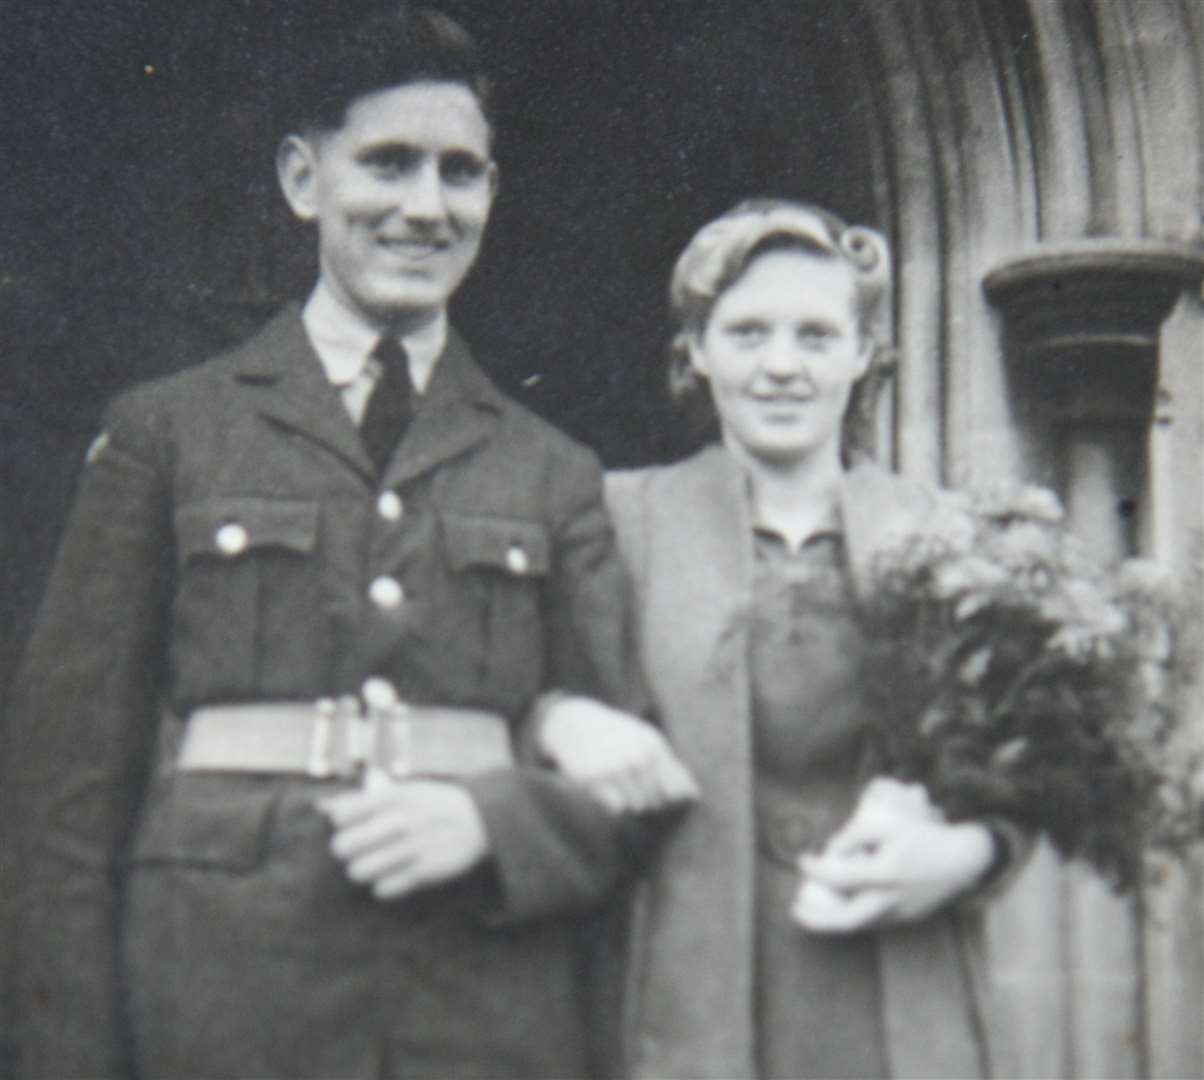 Percy and Jenny Lawrence on their wedding day in November 1944